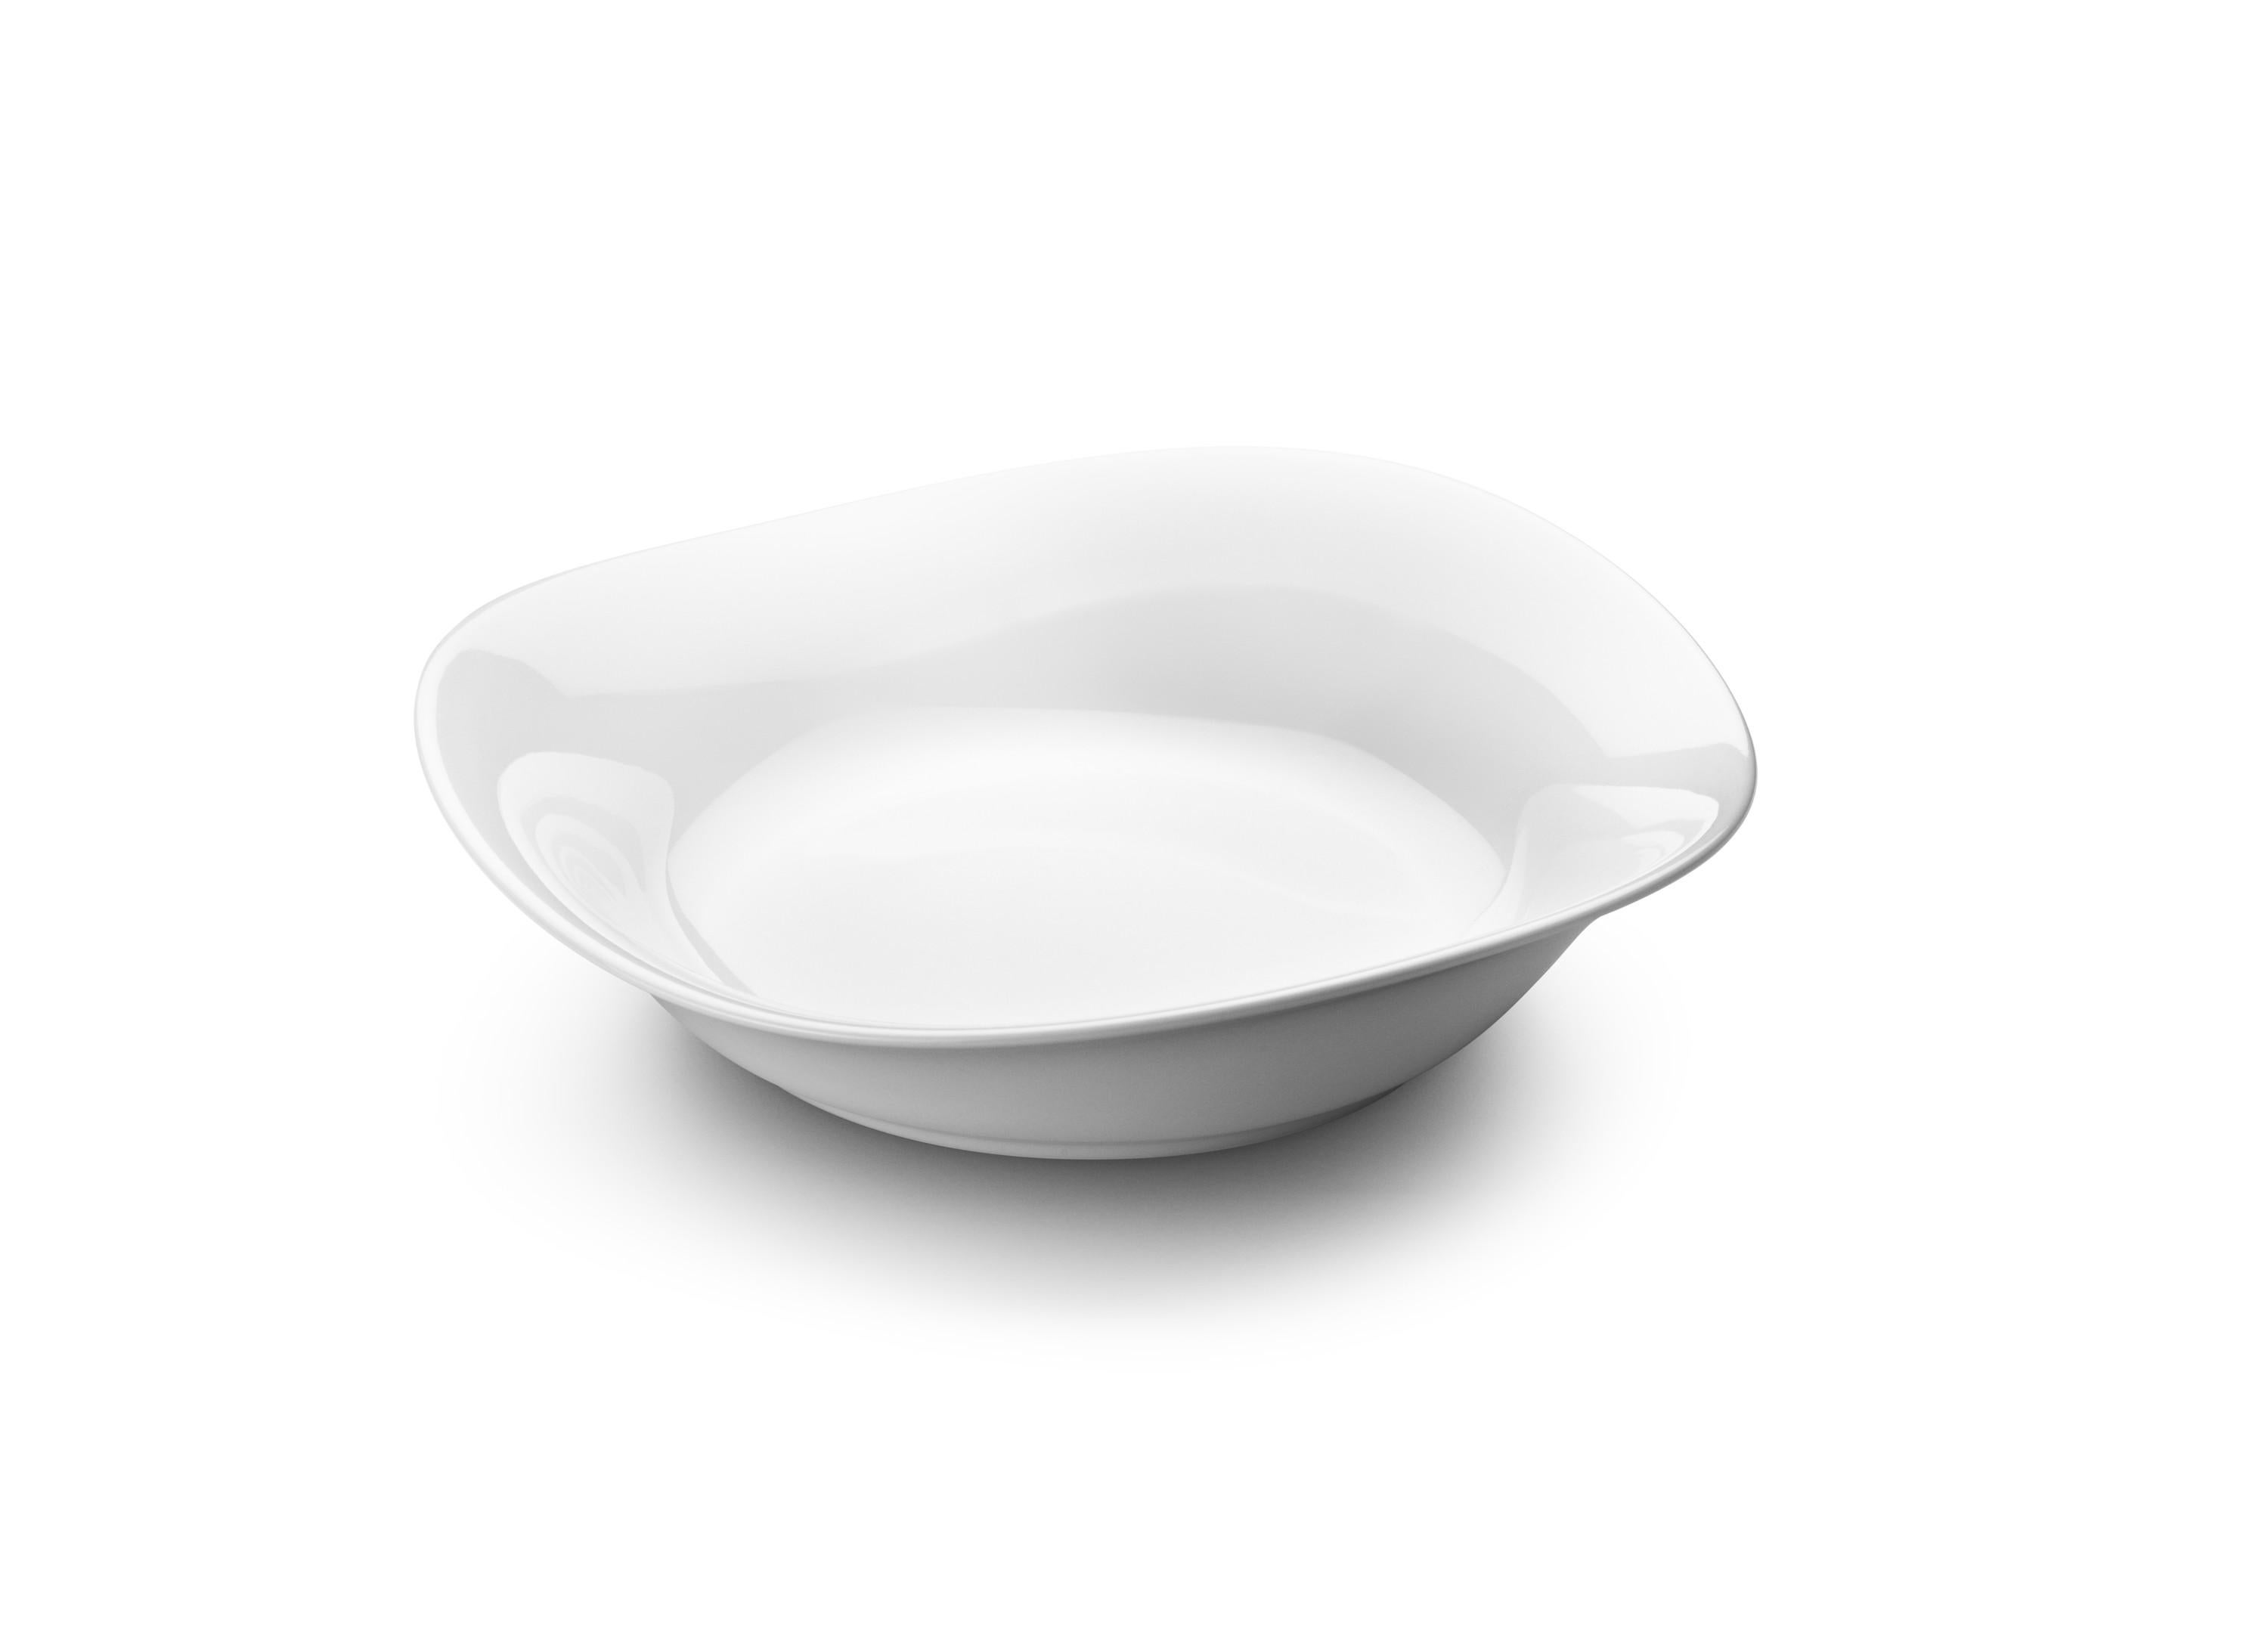 Beautifully contrasting the clean lines of pure white porcelain with a fluid and organic shape, this eye-catching bowl is a stylish way to serve snacks, nuts or candies. It brings a contemporary twist to the dining table and is sure to be a